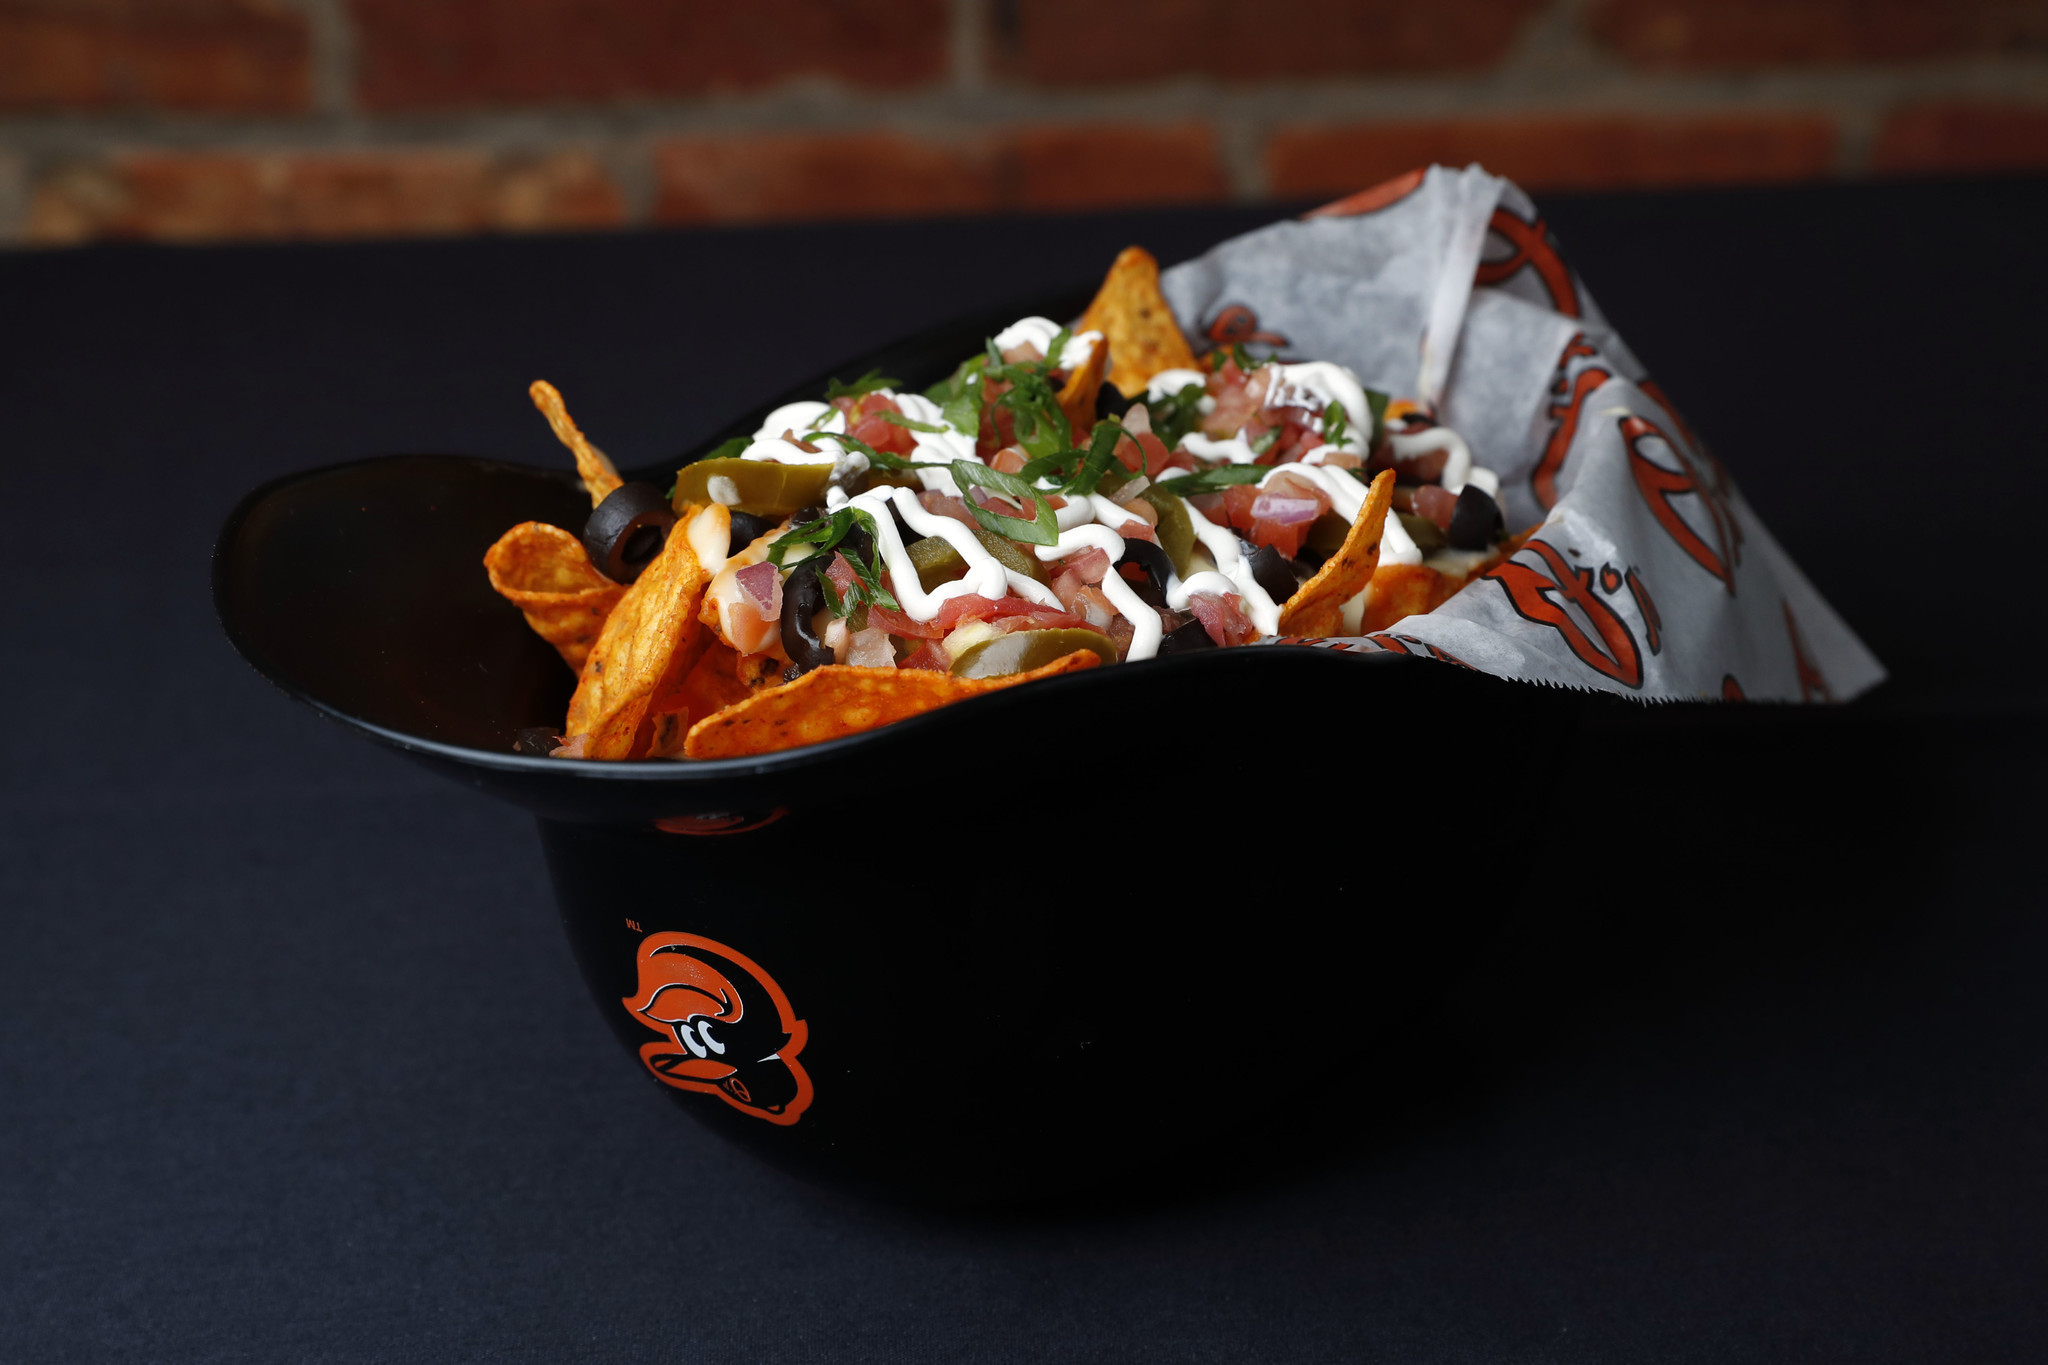 Camden Yards to get new concessions operator in 2023 – The